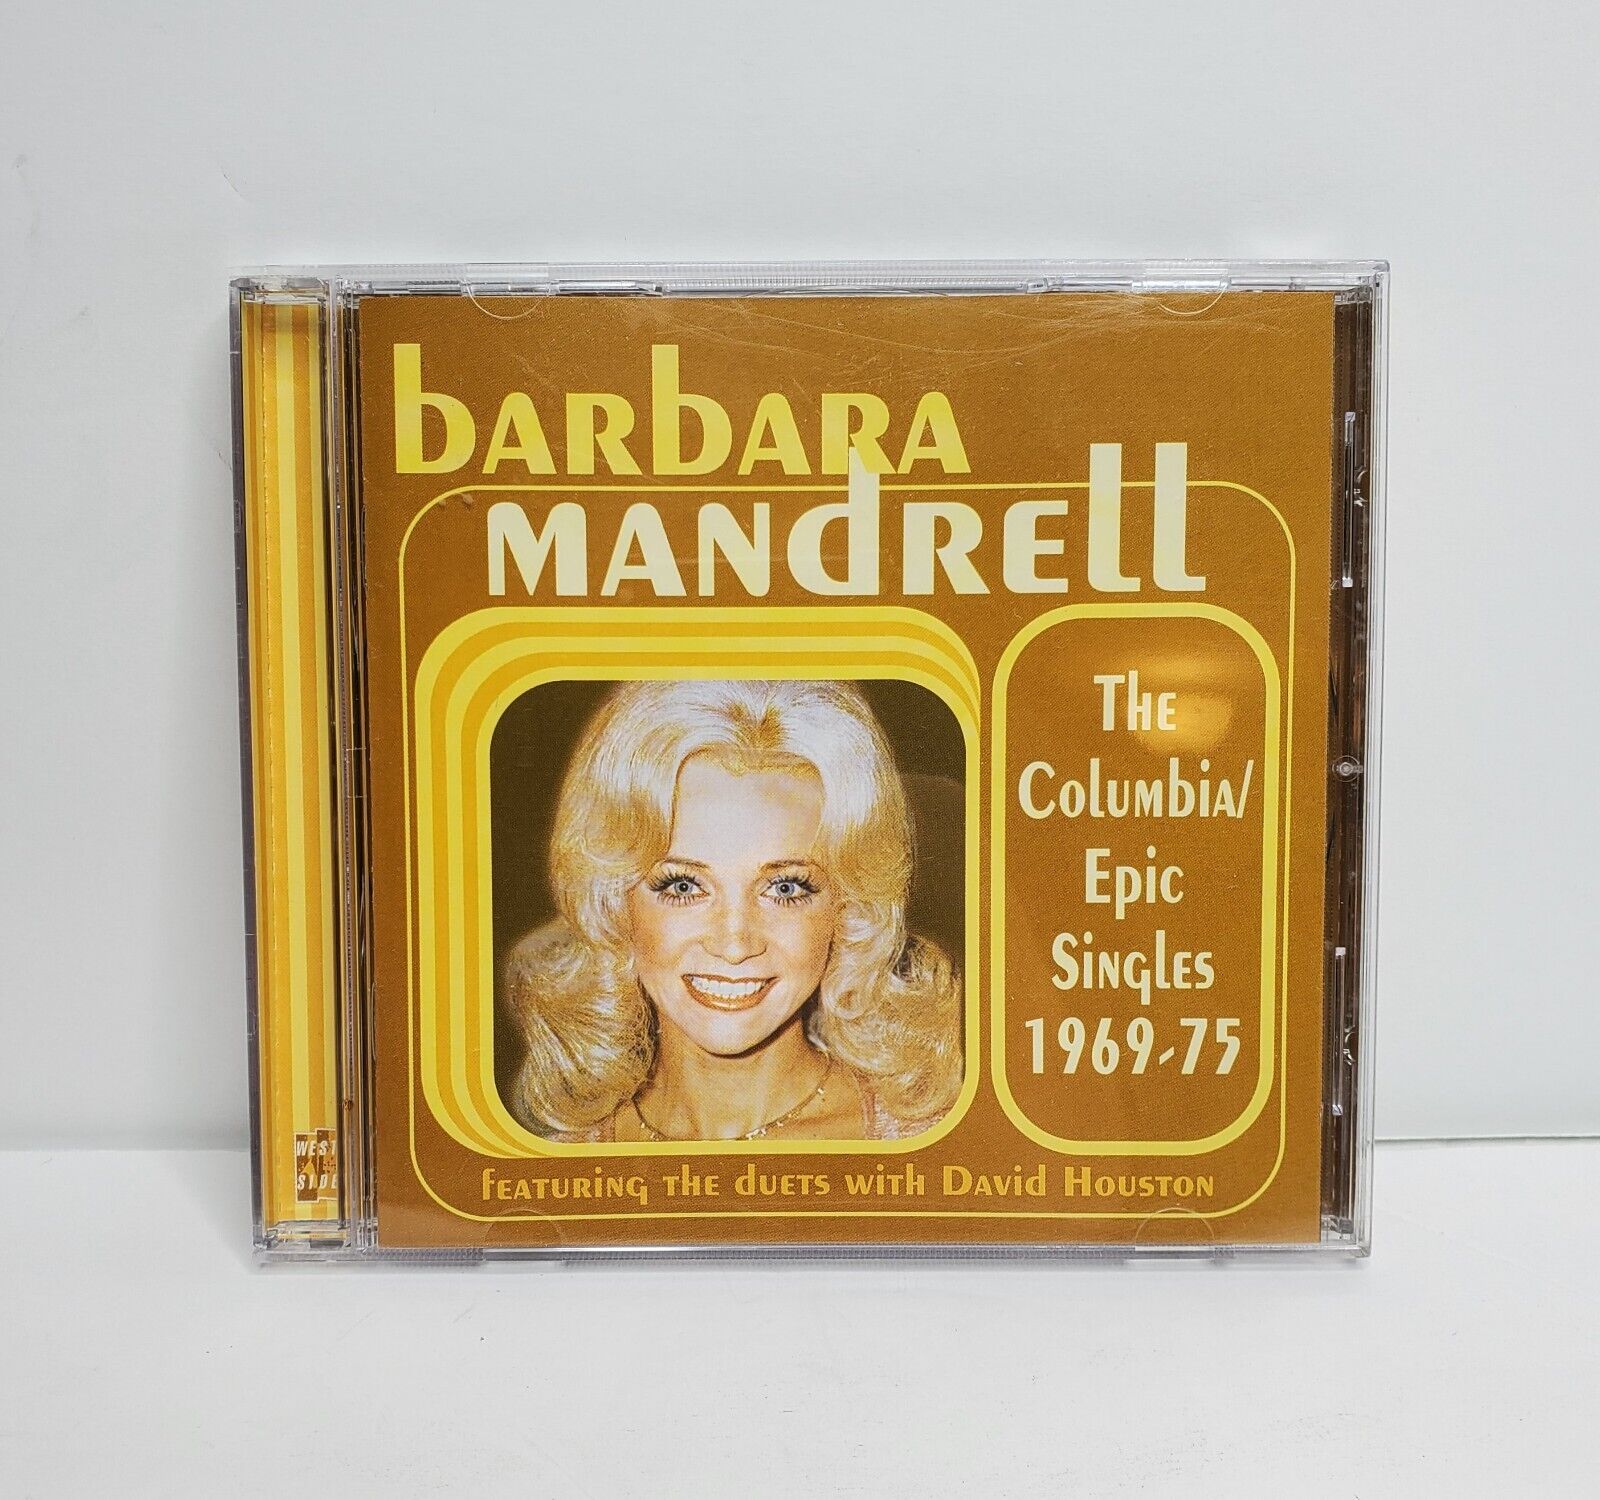 Barbara Mandrell : The Columbia/Epic Singles 1969-75 CD Mint Condition 